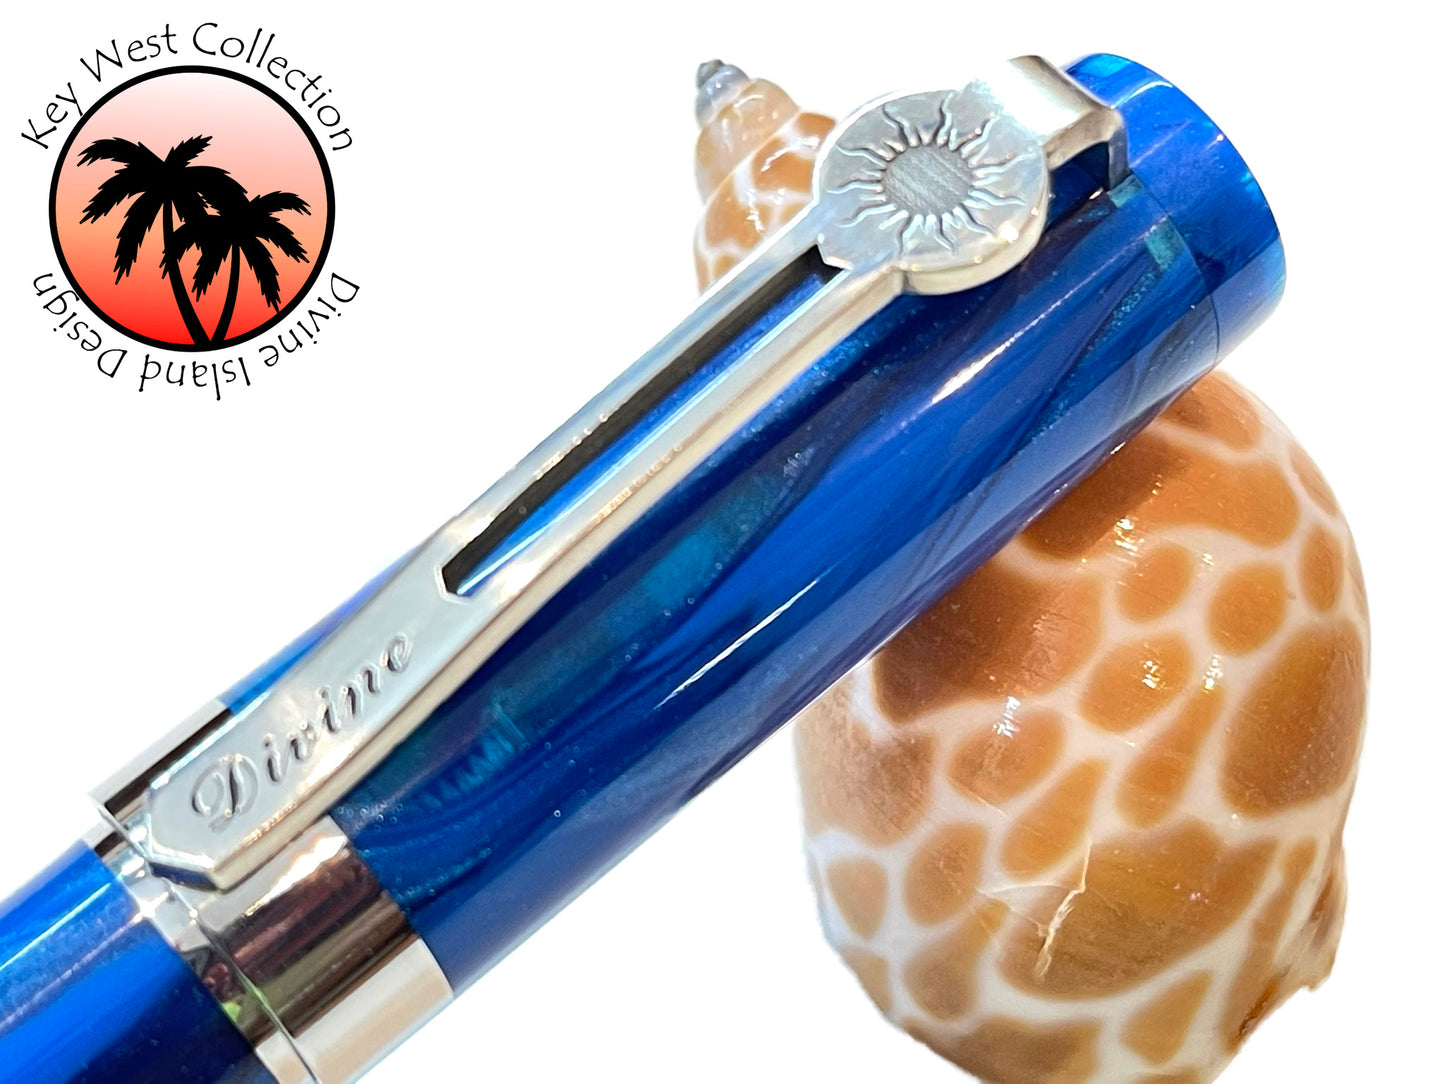 Key West Collection Fountain Pen - "Paradise"